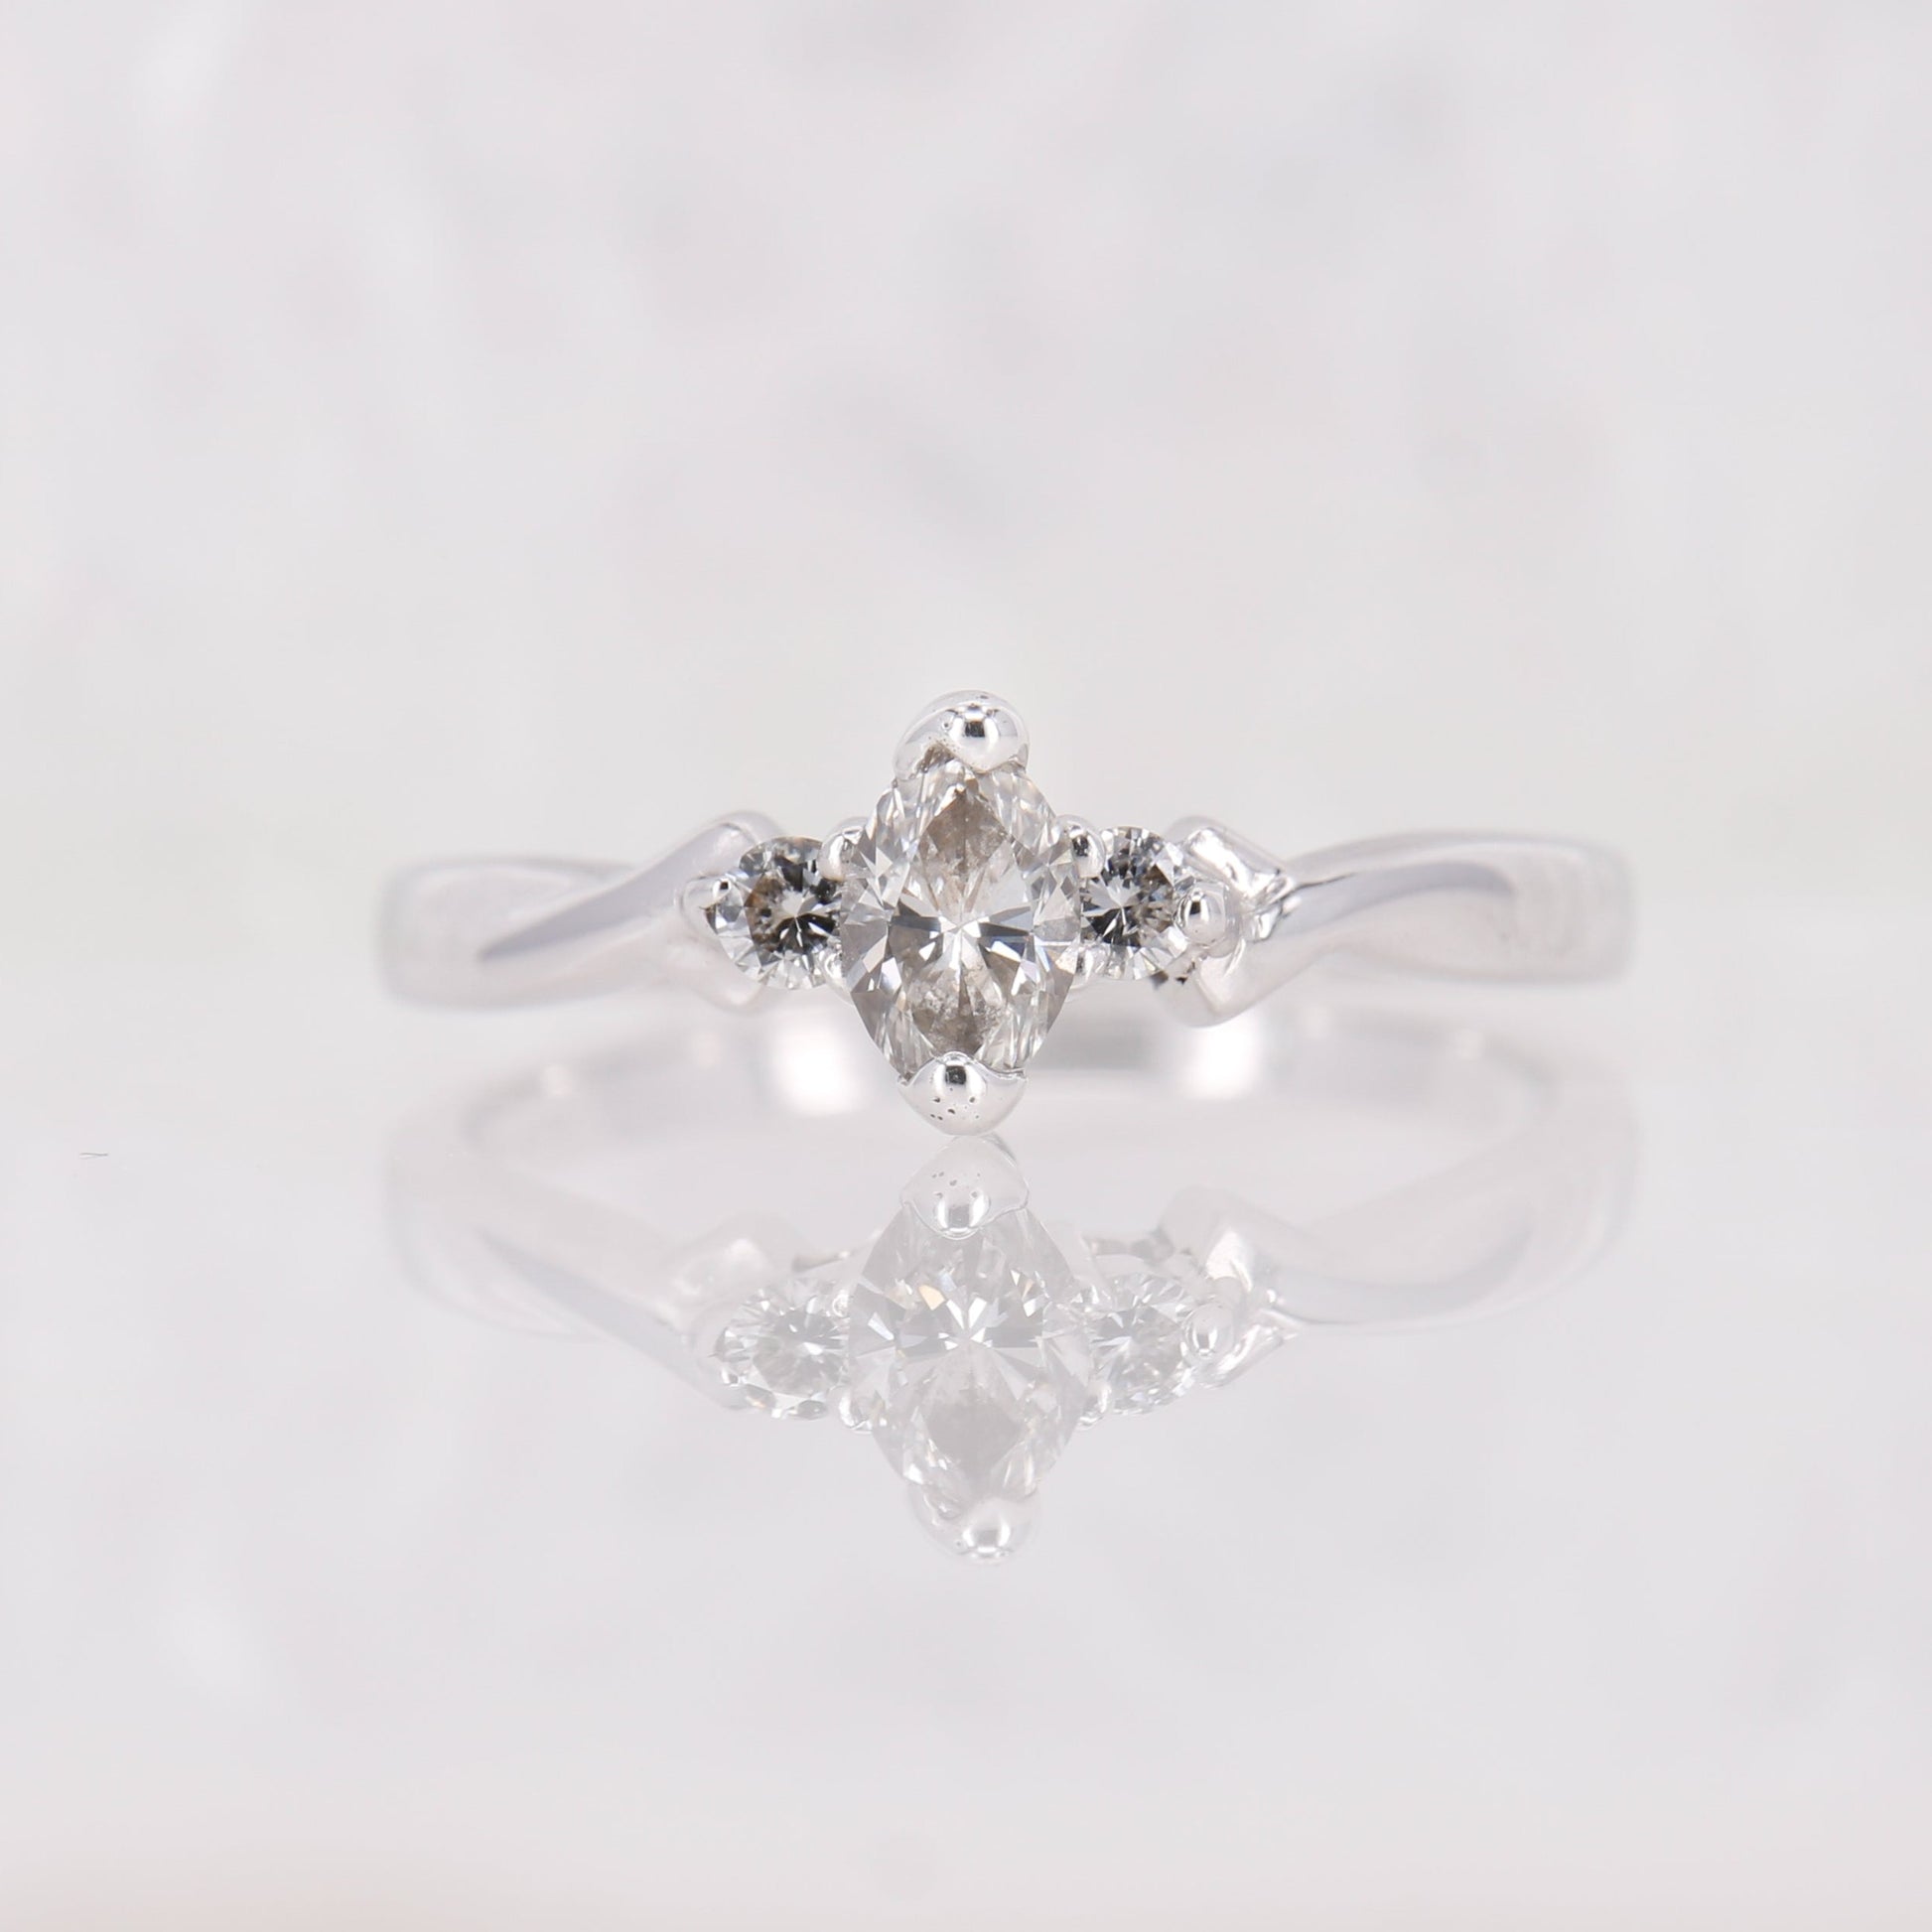 18ct White Gold Diamond Engagement Ring, 18k Gold Marquise Diamond Trilogy Ring, Secondhand Vintage Marquise cut Engagement Ring.